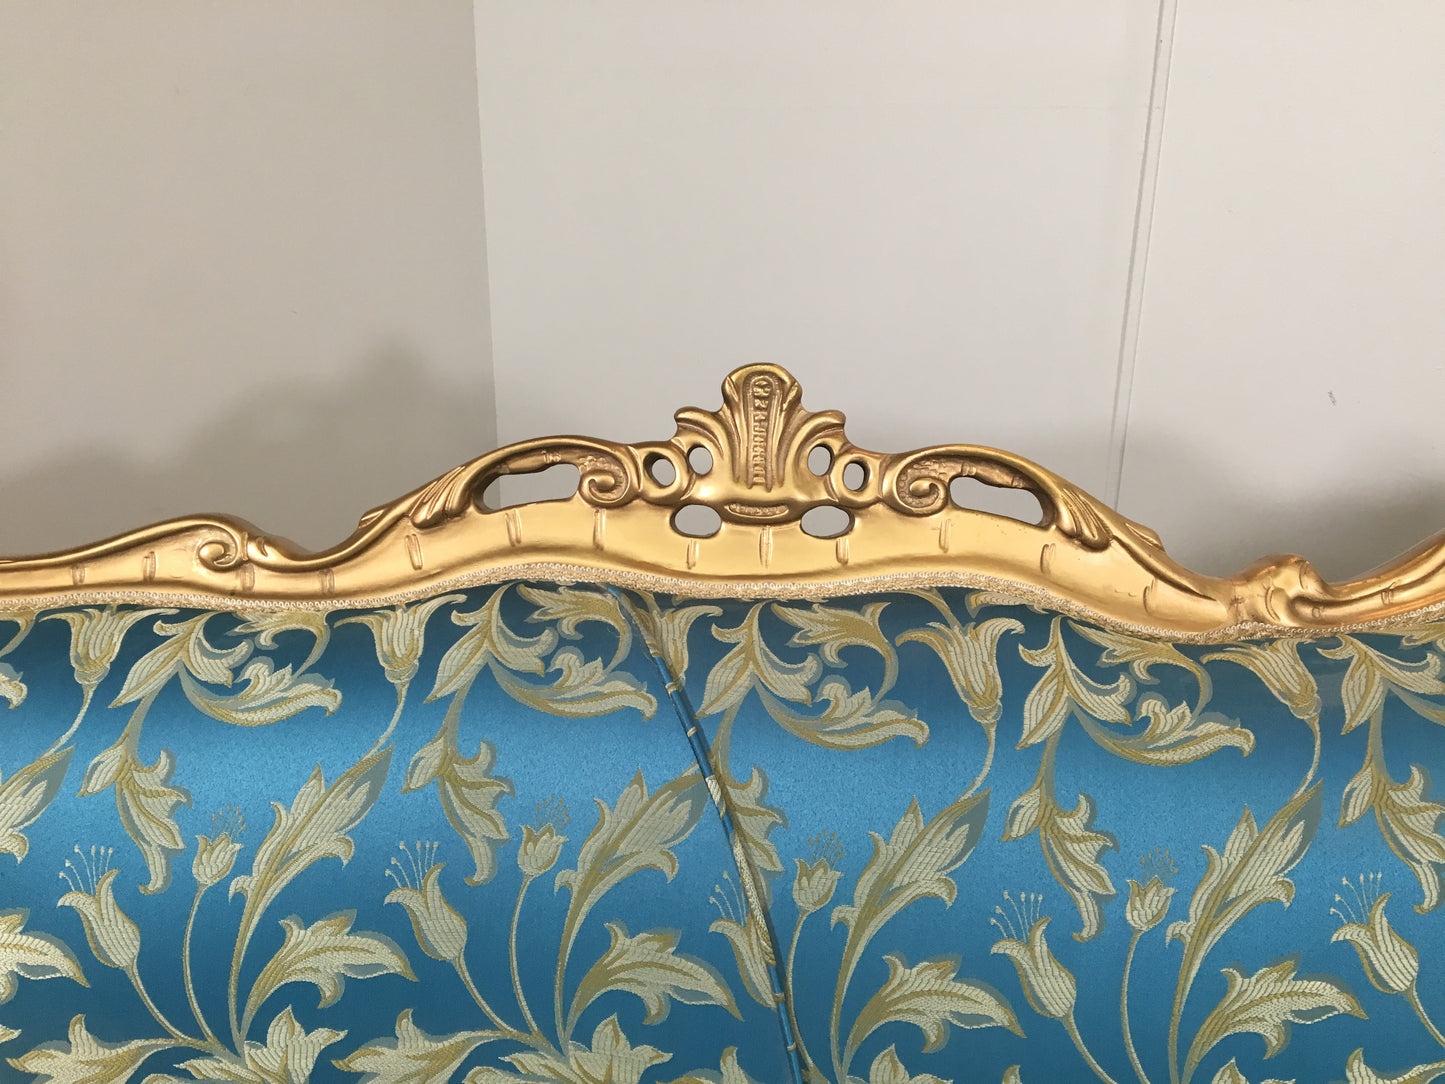 ORNATE ROCOCO GOLD AND ROBINS EGG BLUE COUCH